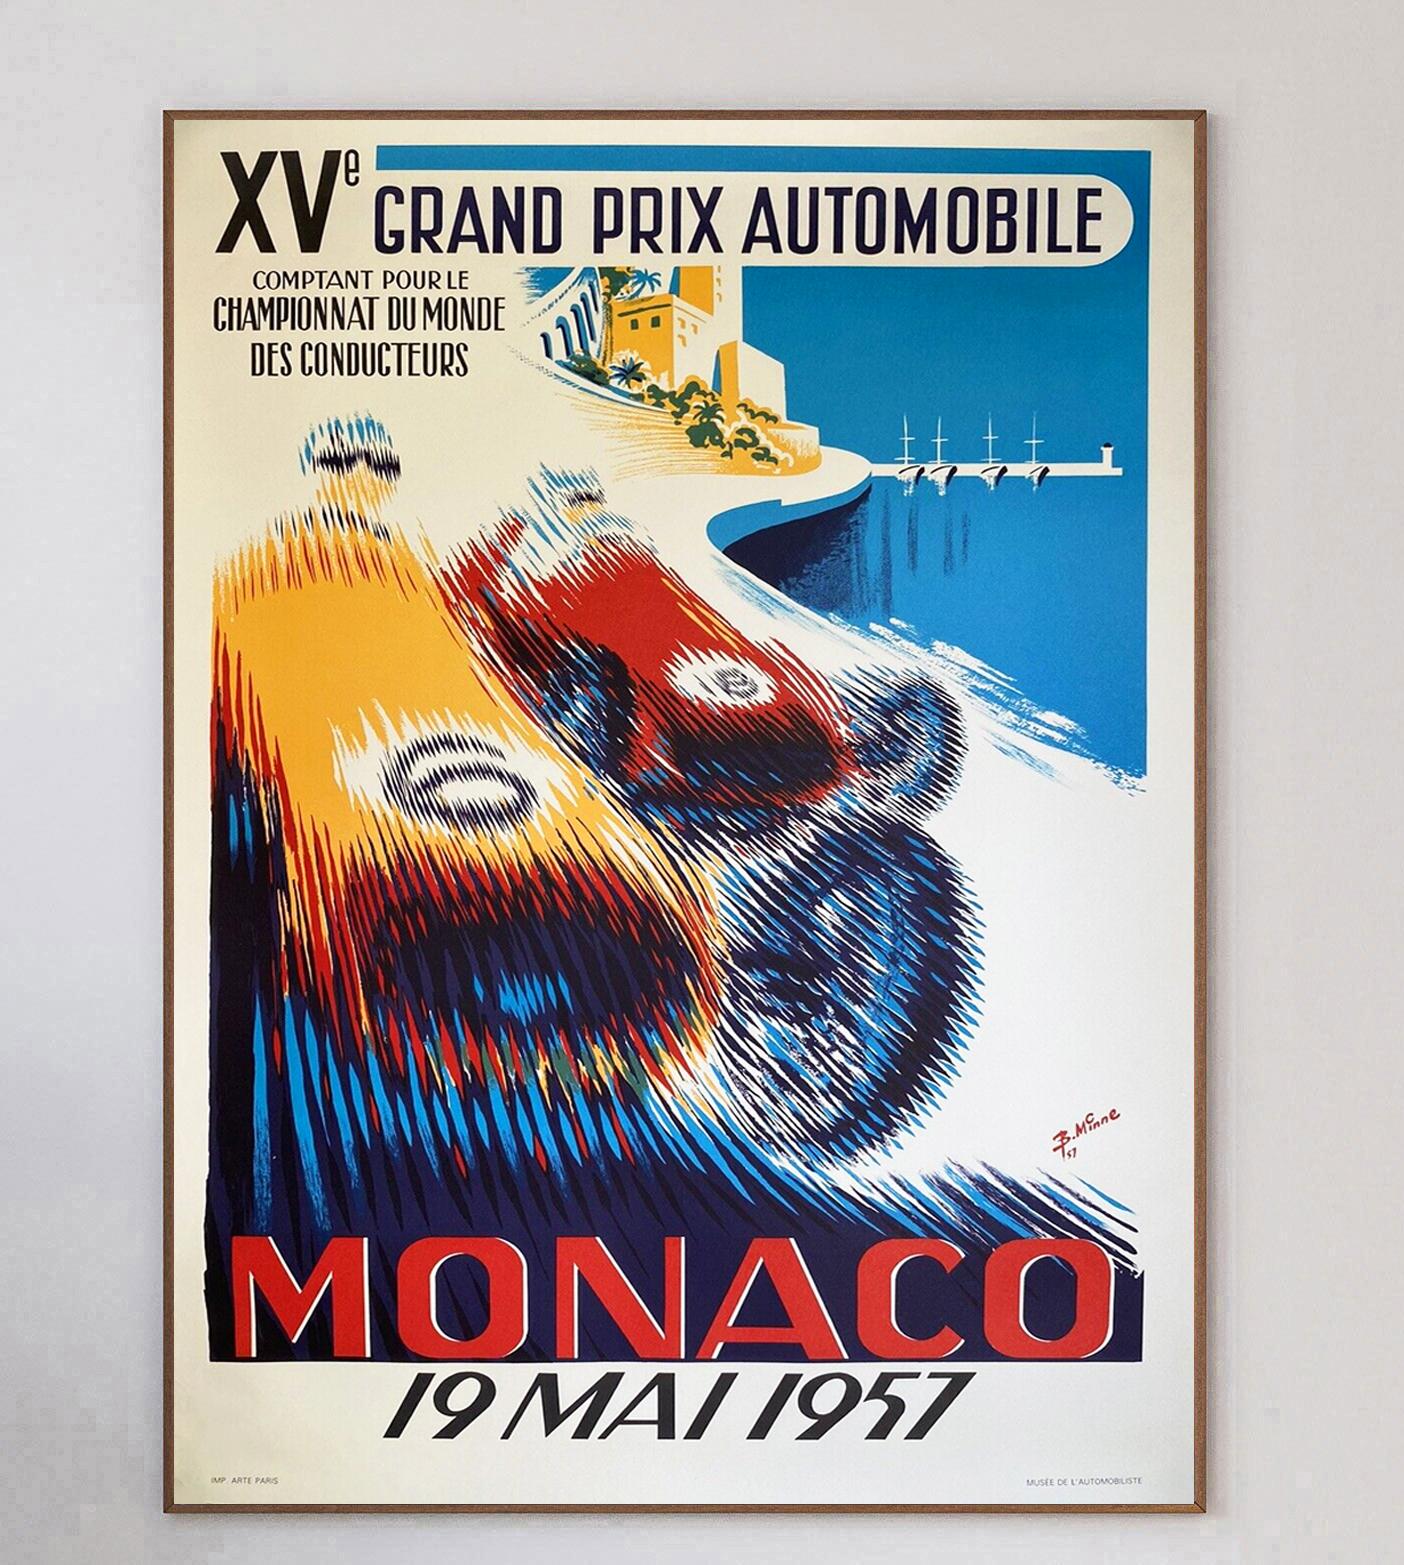 This poster is for the 1957 Monaco Grand Prix, with the brilliant illustration design by B. Minne. The vibrant and vivid colours of the design depict the contrast between the race cars, the sun, and the sea of Monaco.

This stunning art deco